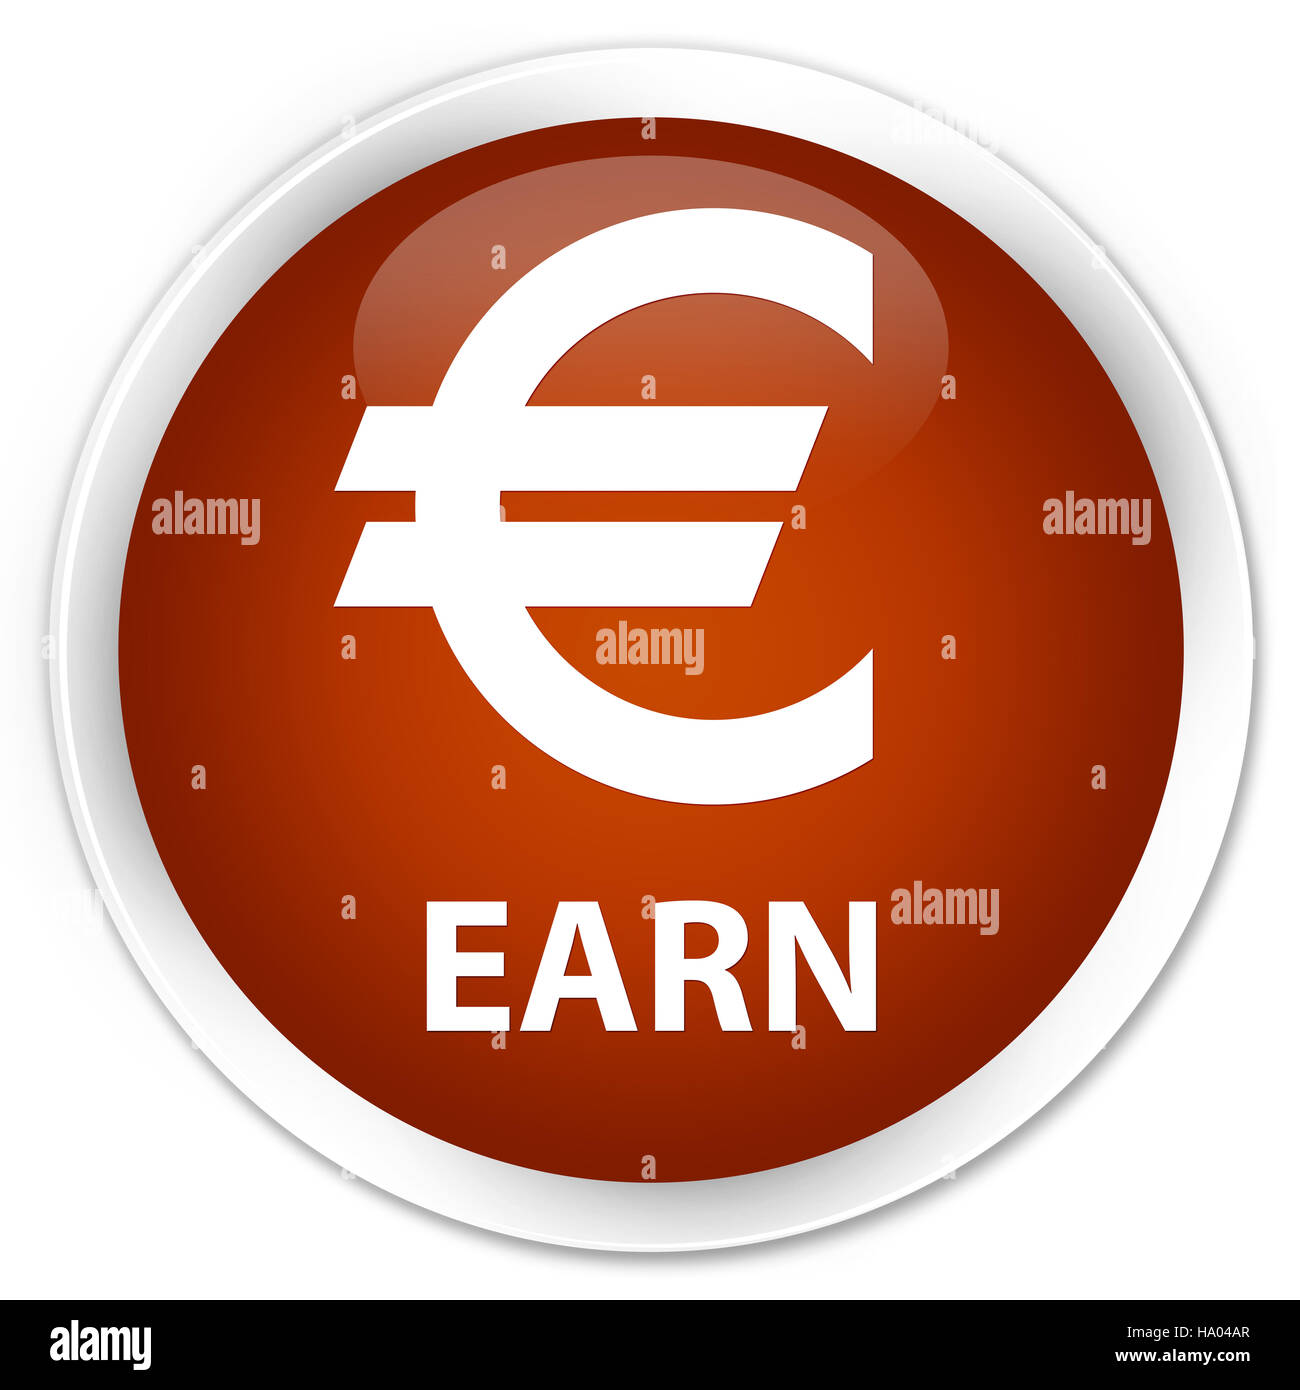 Earn (euro sign) isolated on premium brown round button abstract illustration Stock Photo